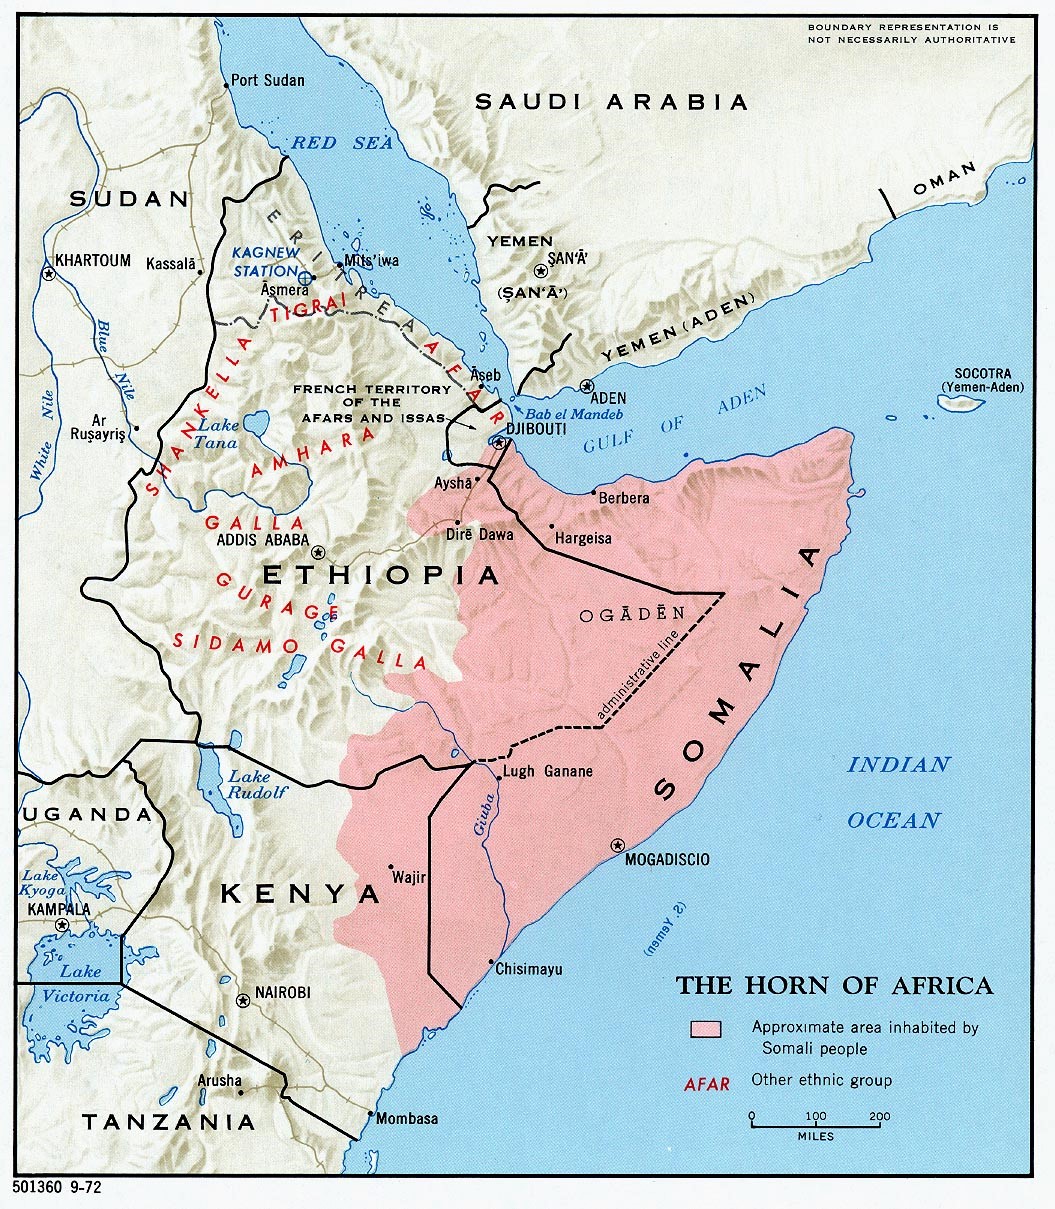 Djibouti A Tiny Haven With Strategic Importance In